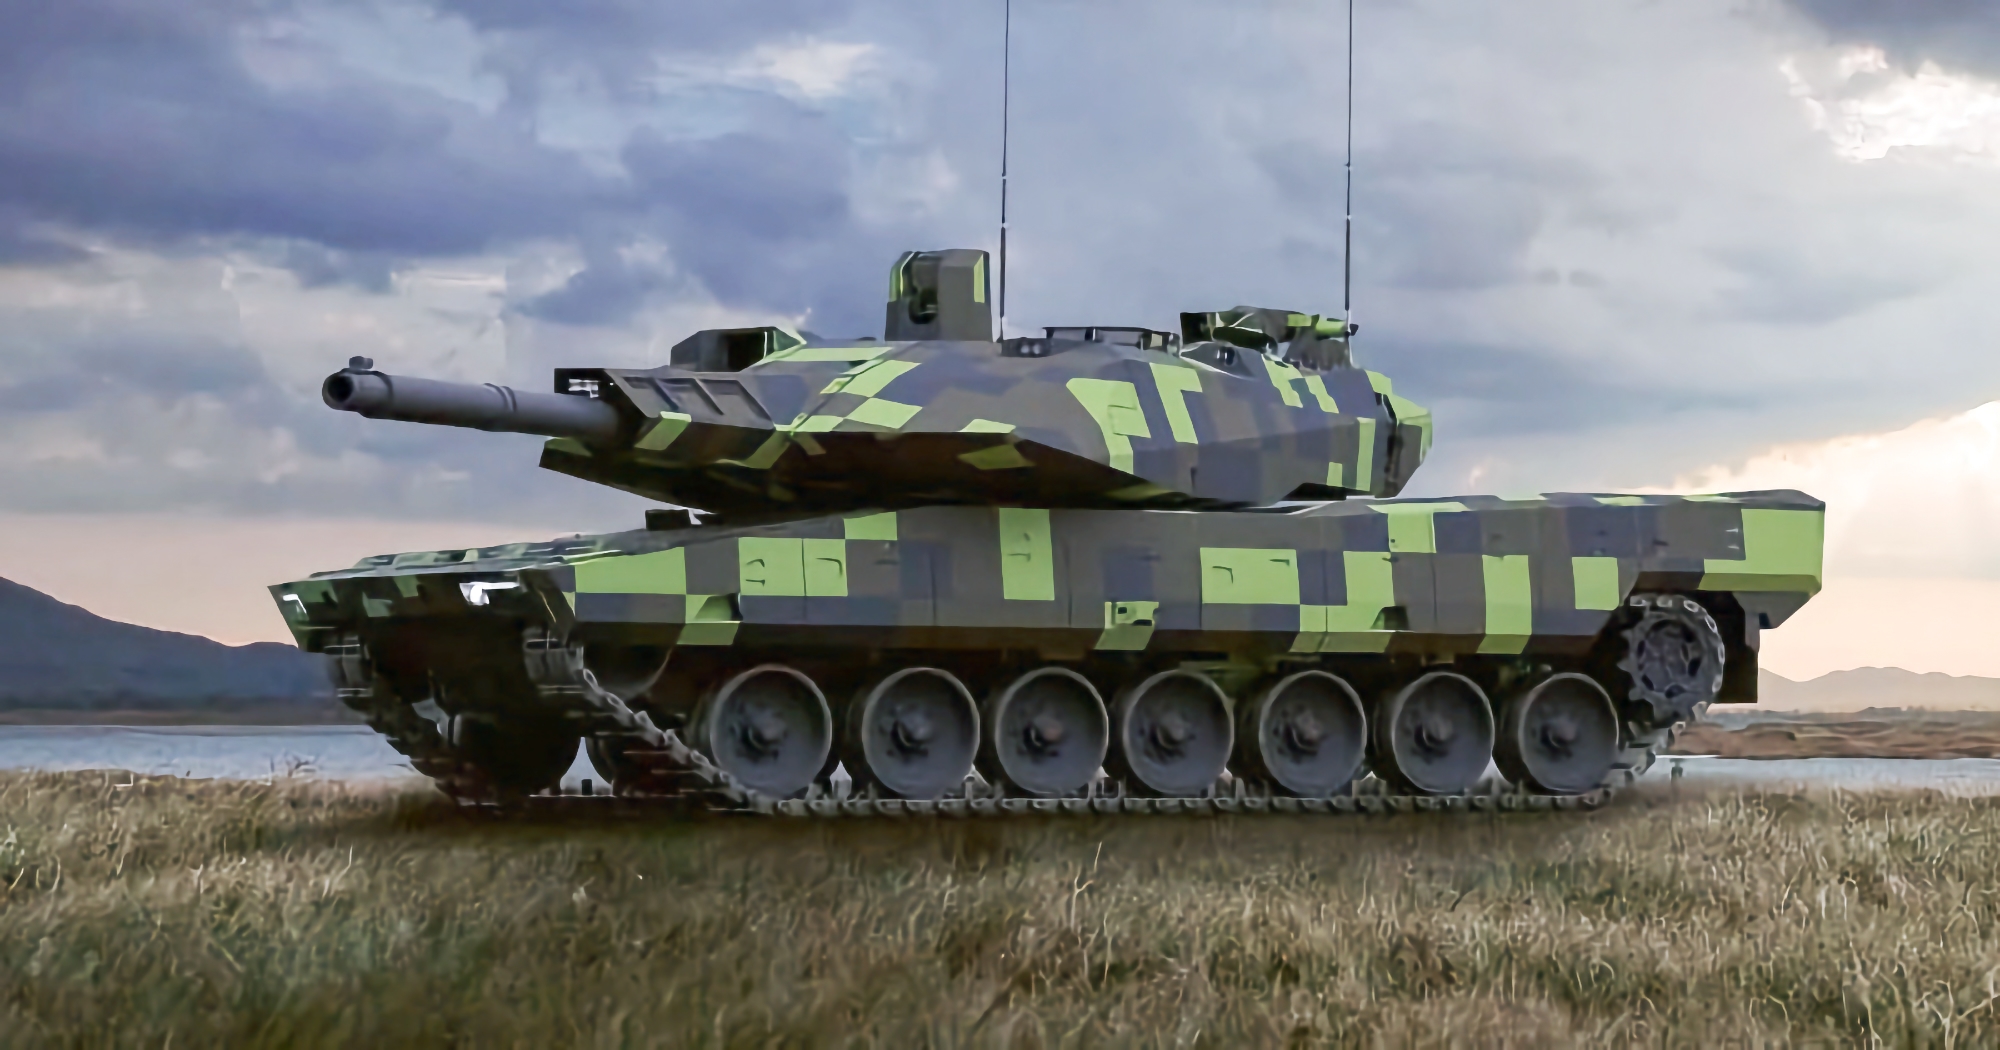 Hungary wants to produce modern KF51 Panther tanks at the Rheinmetall plant